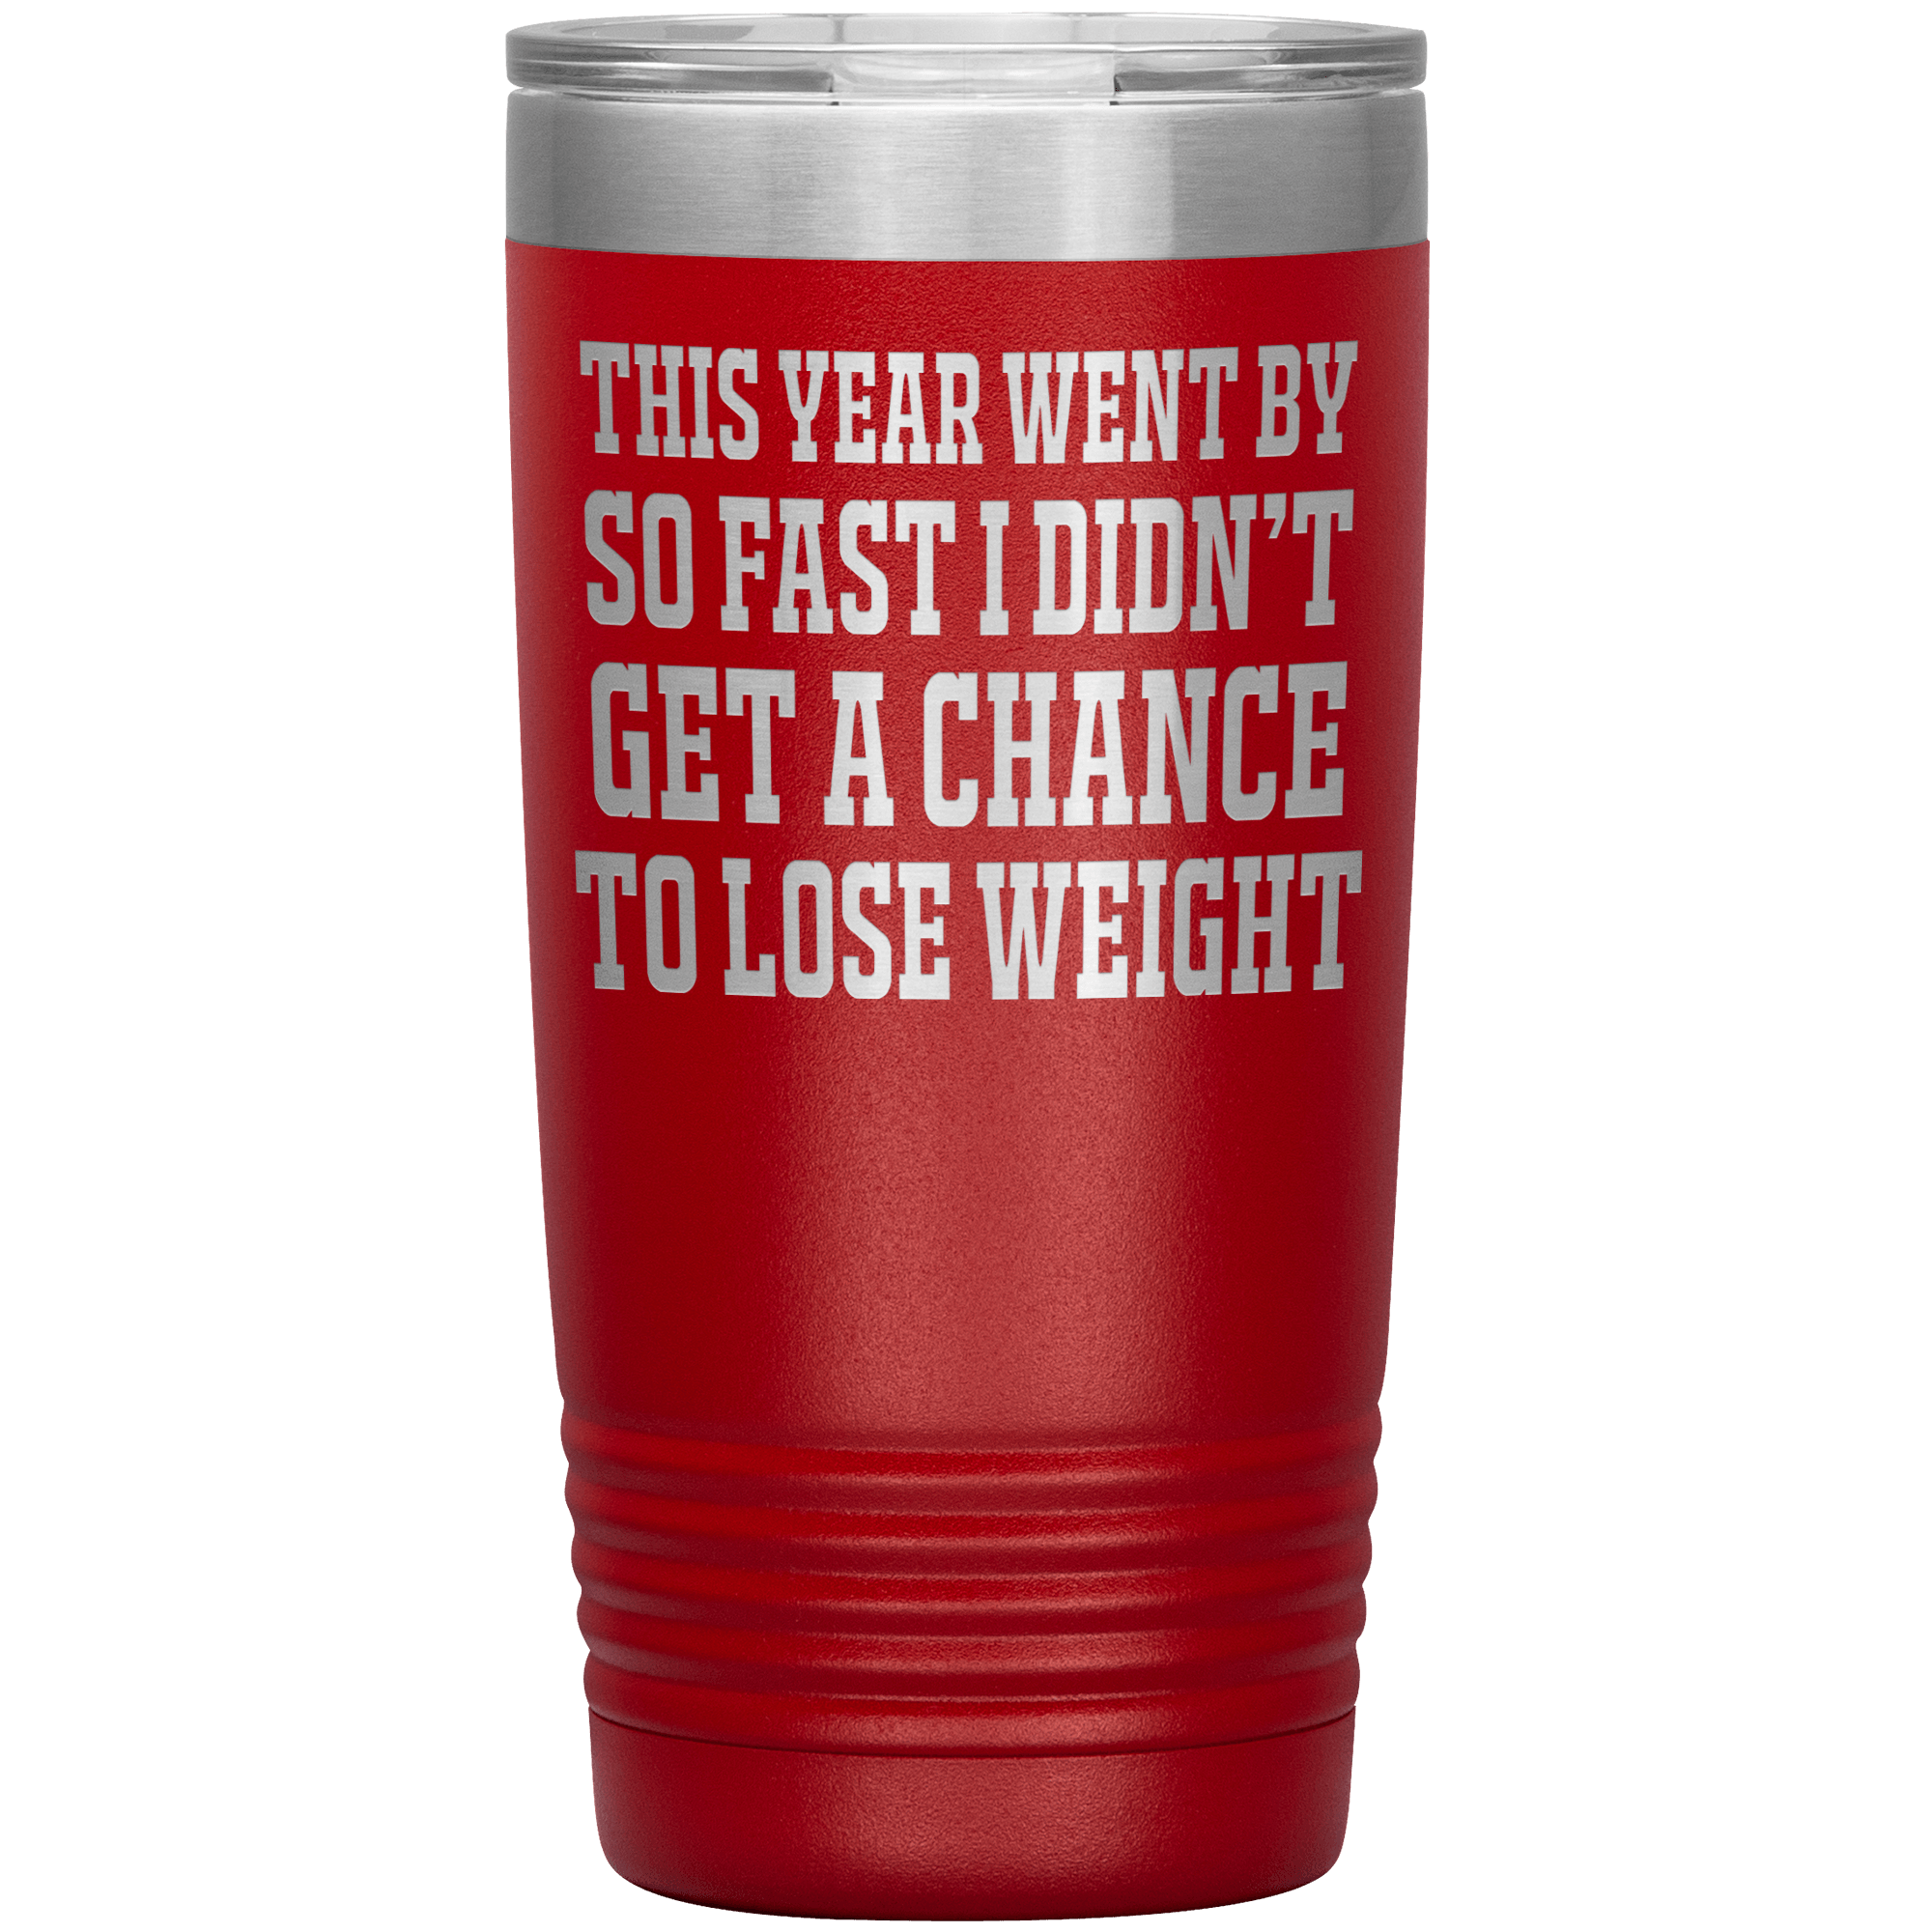 DIDN'T GET THE CHANCE TO LOSE WEIGHT - TUMBLER